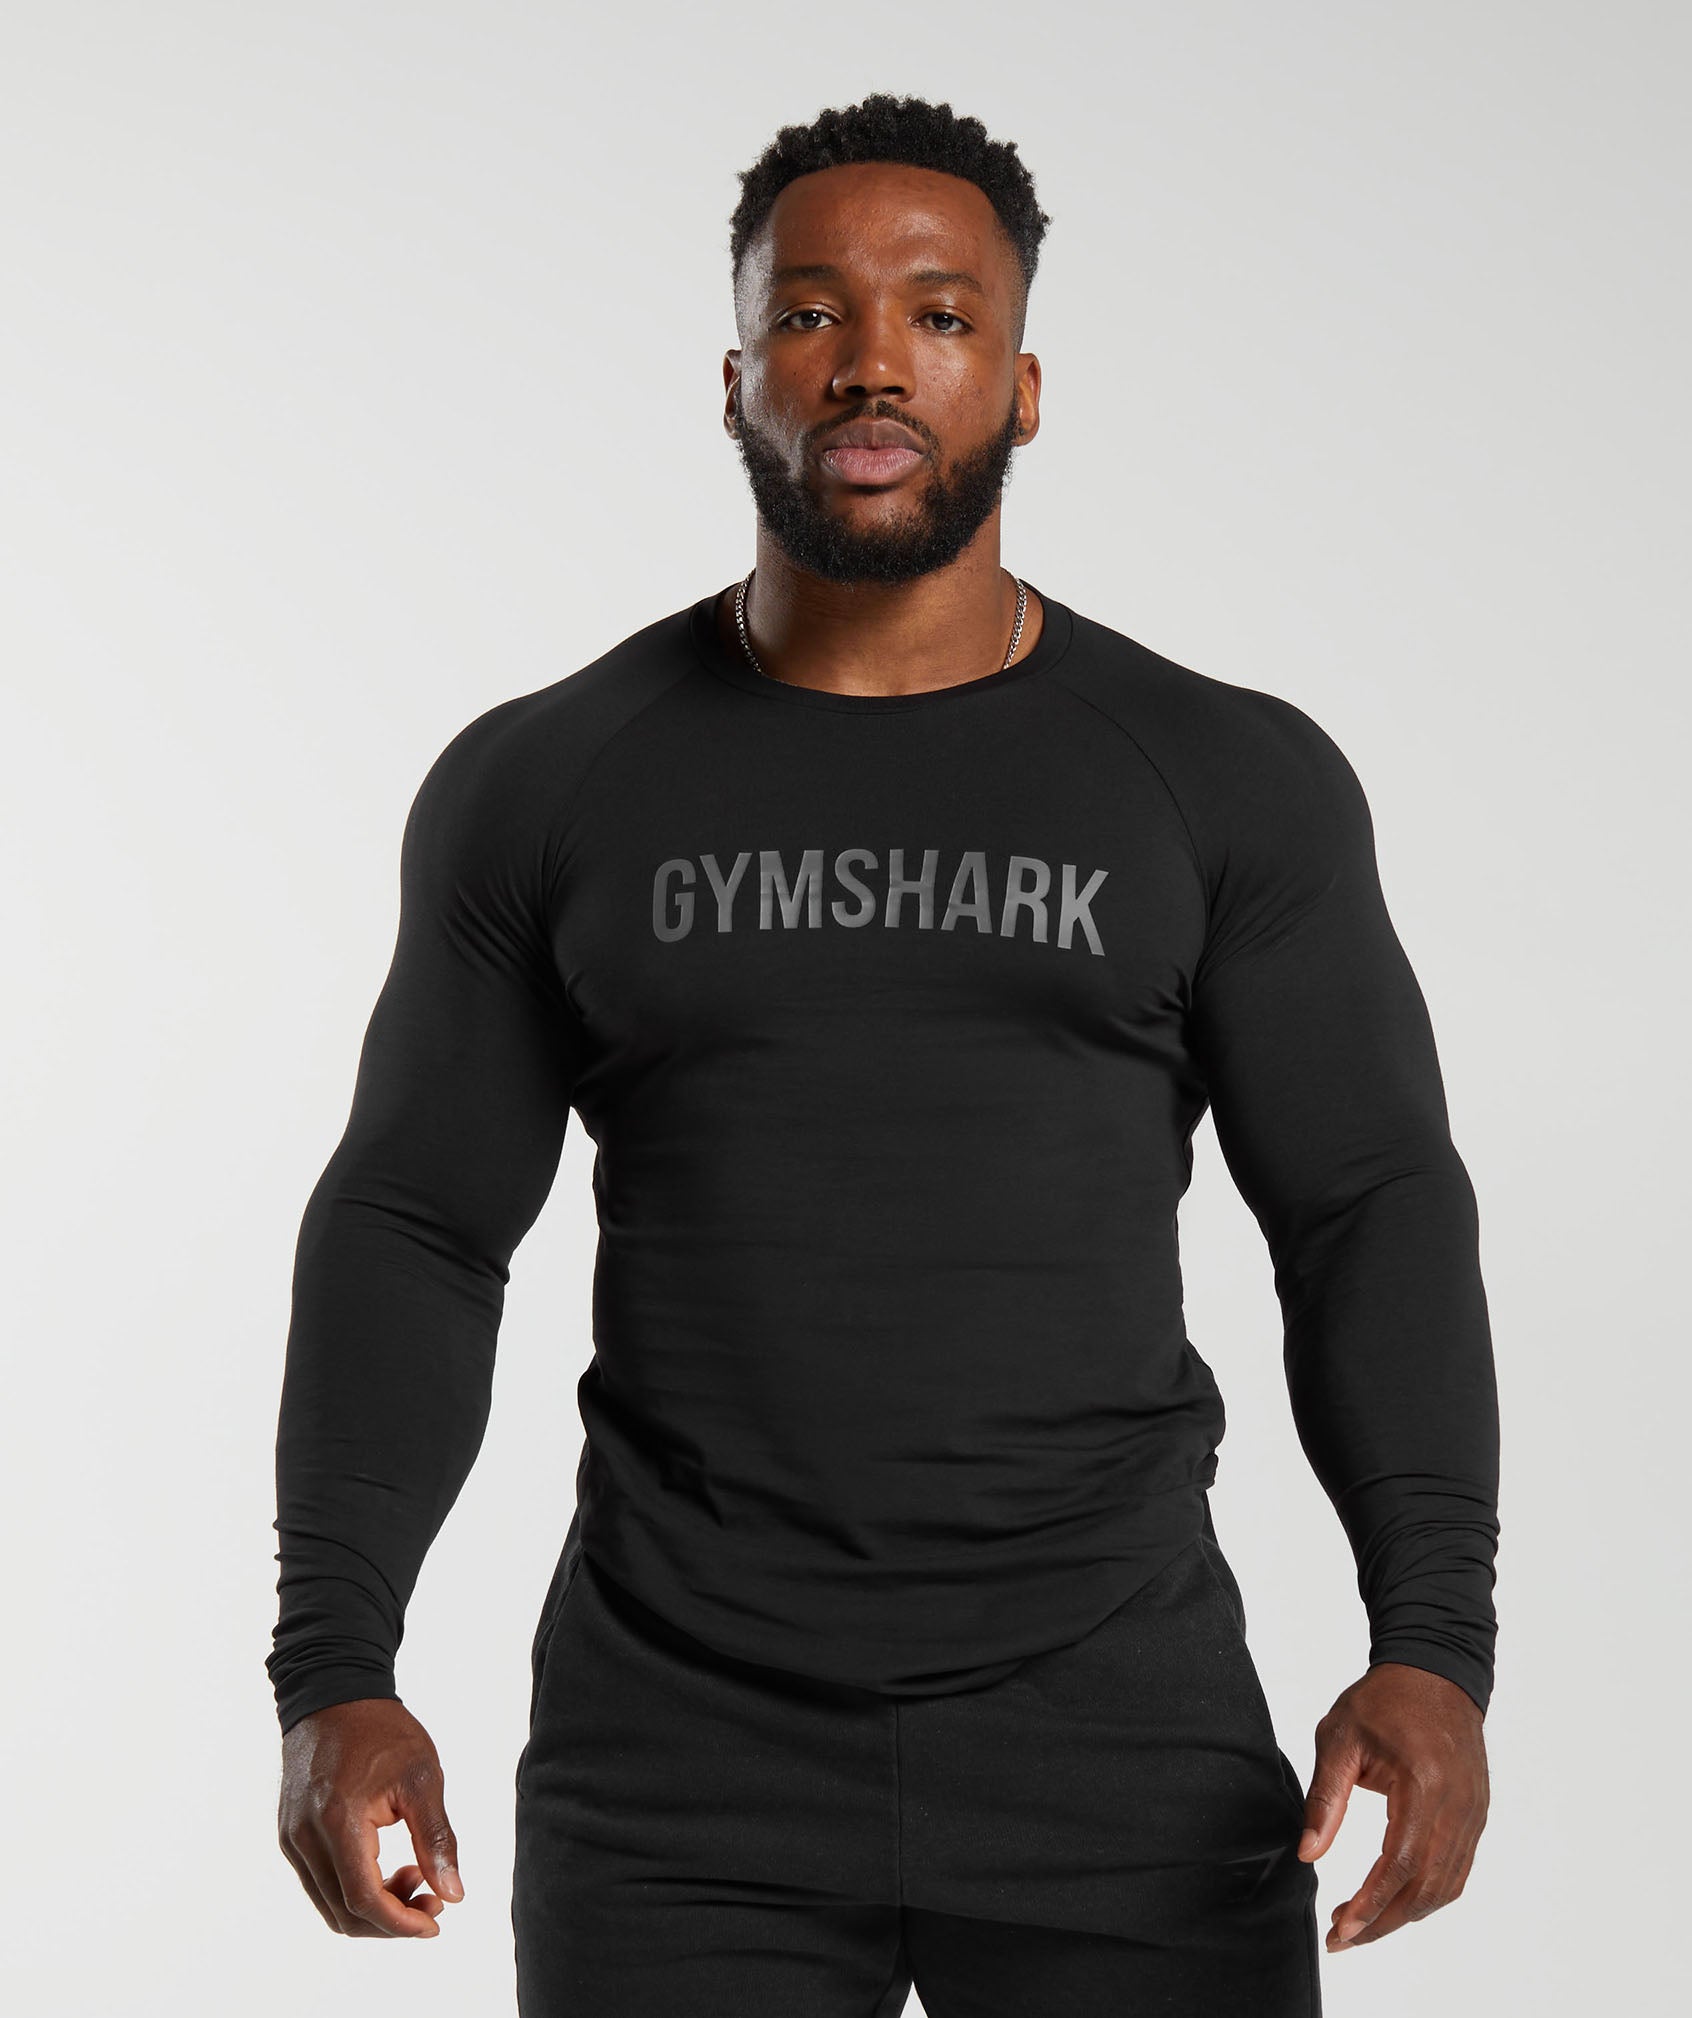 Men's Long Sleeve Tops  Compression, Running & Gym – tagged